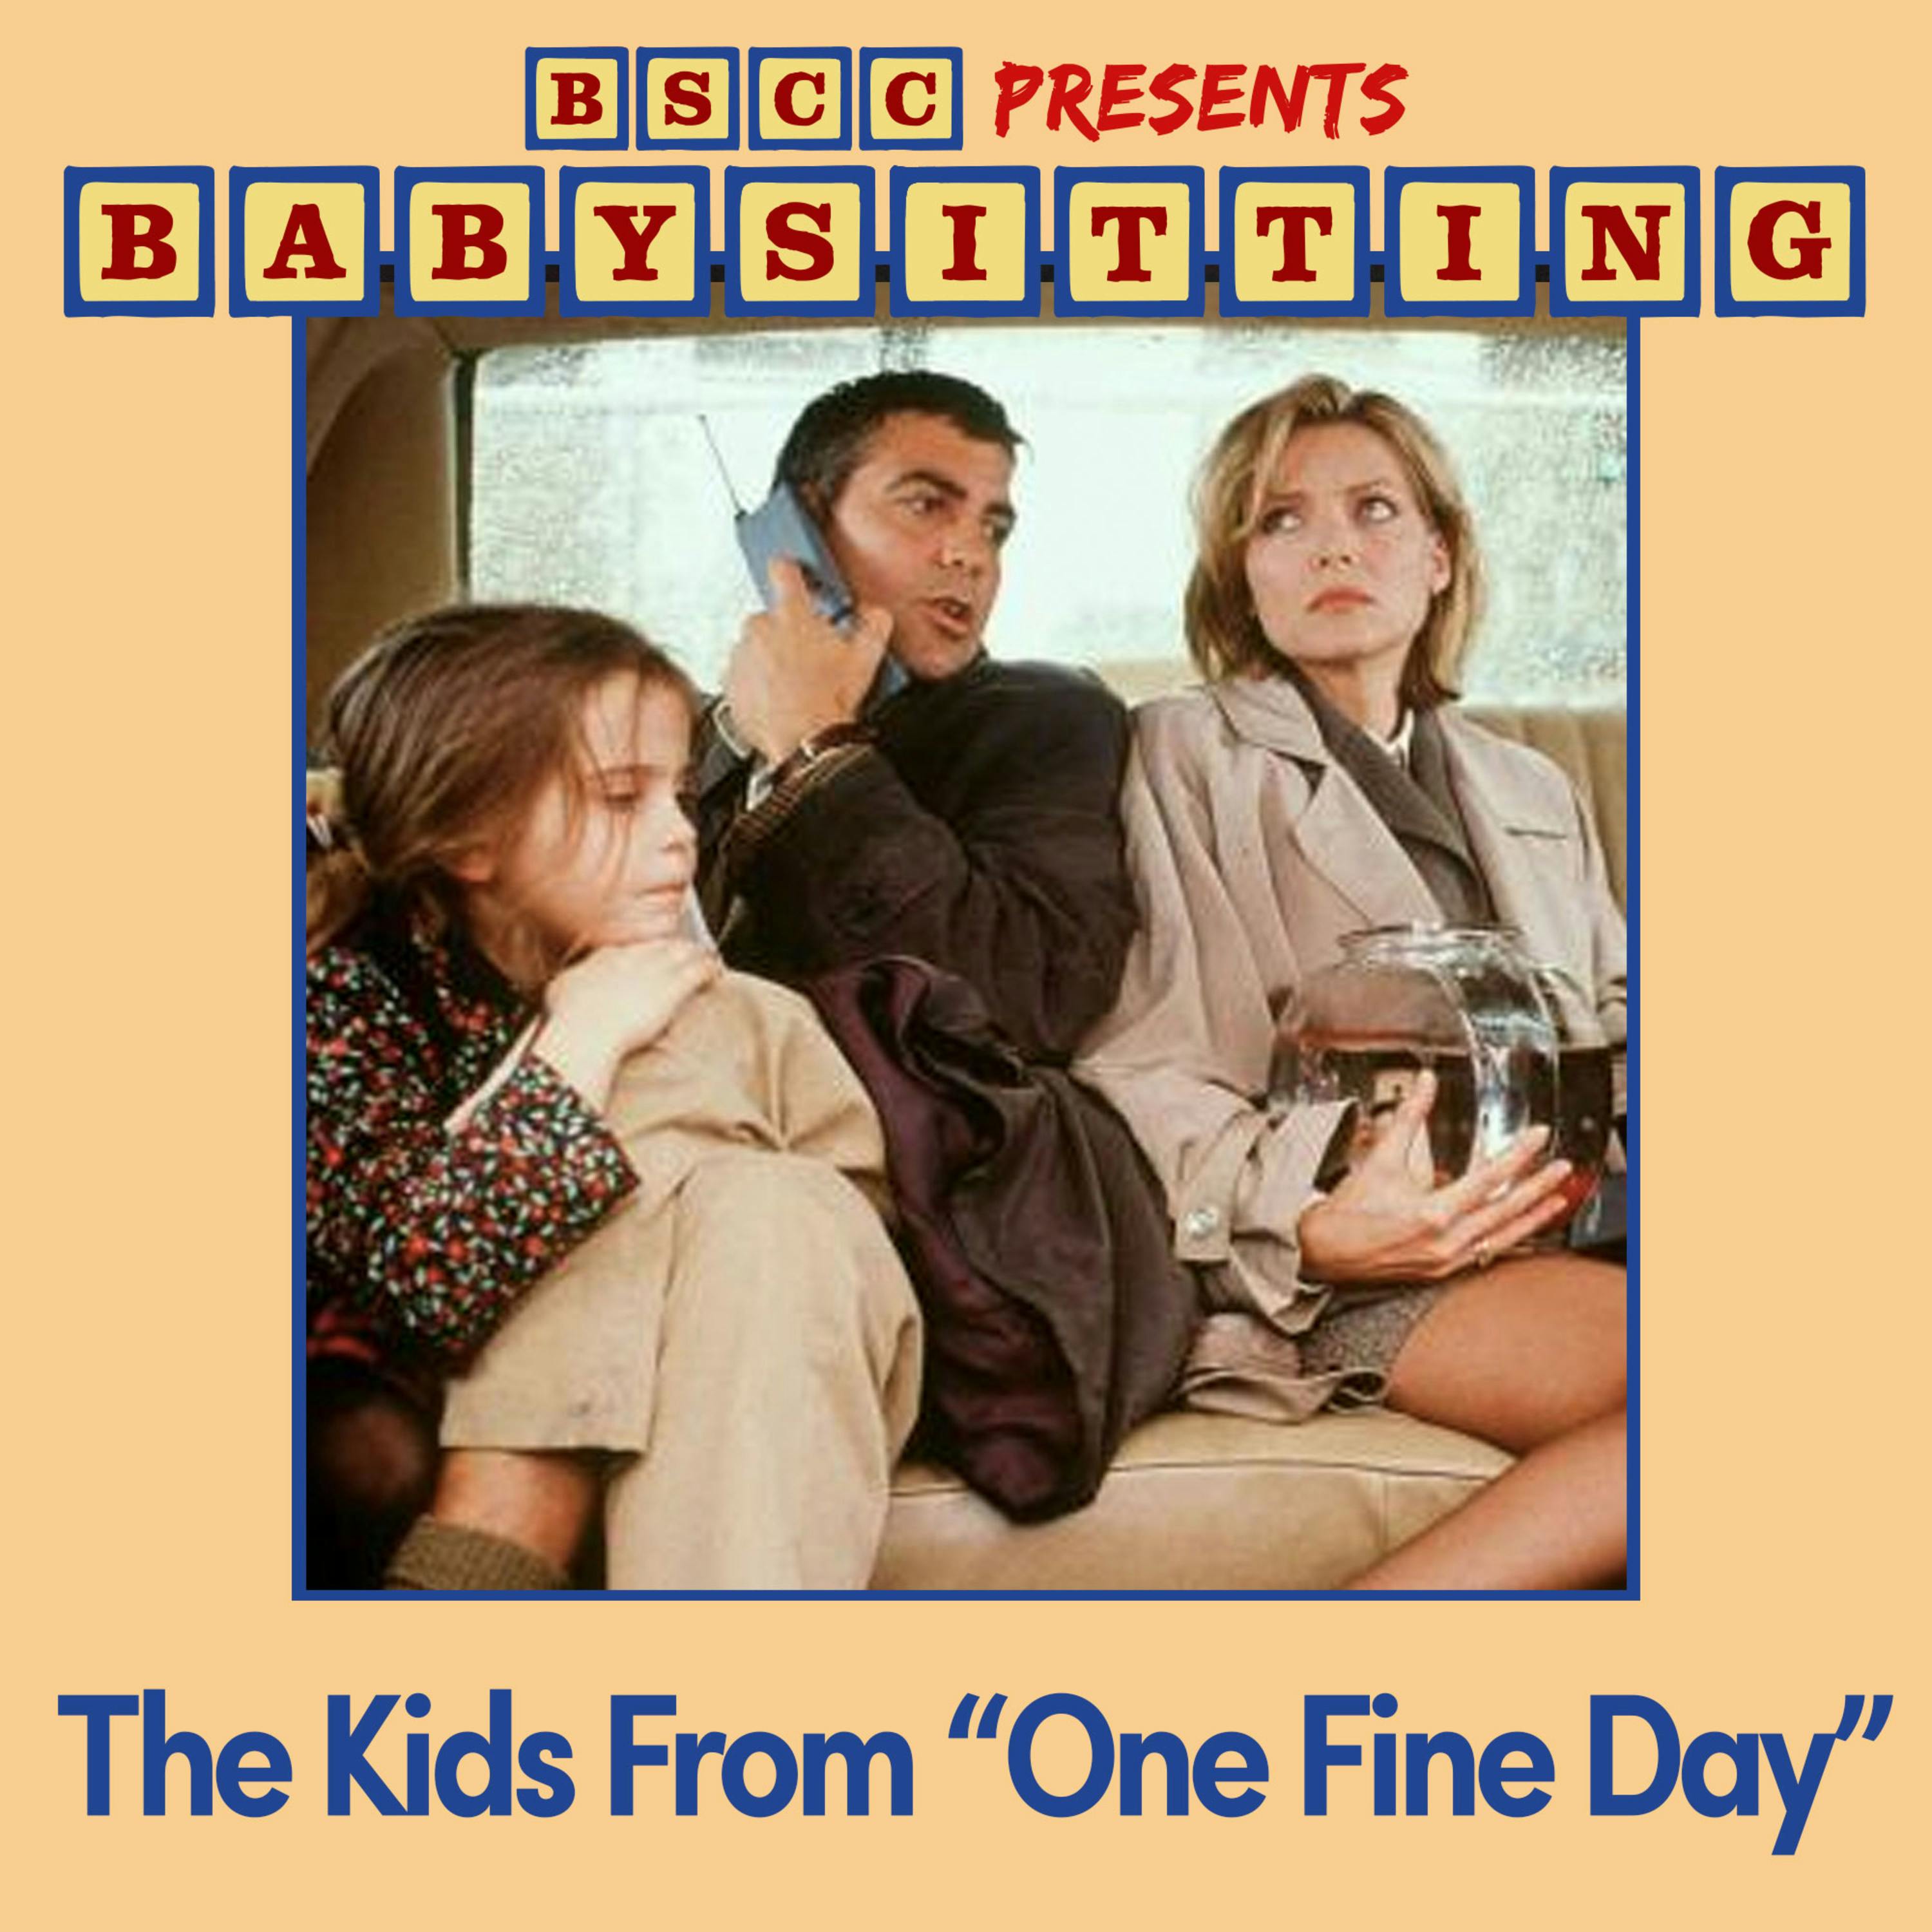 BSCC Presents: Babysitting the Kids From 